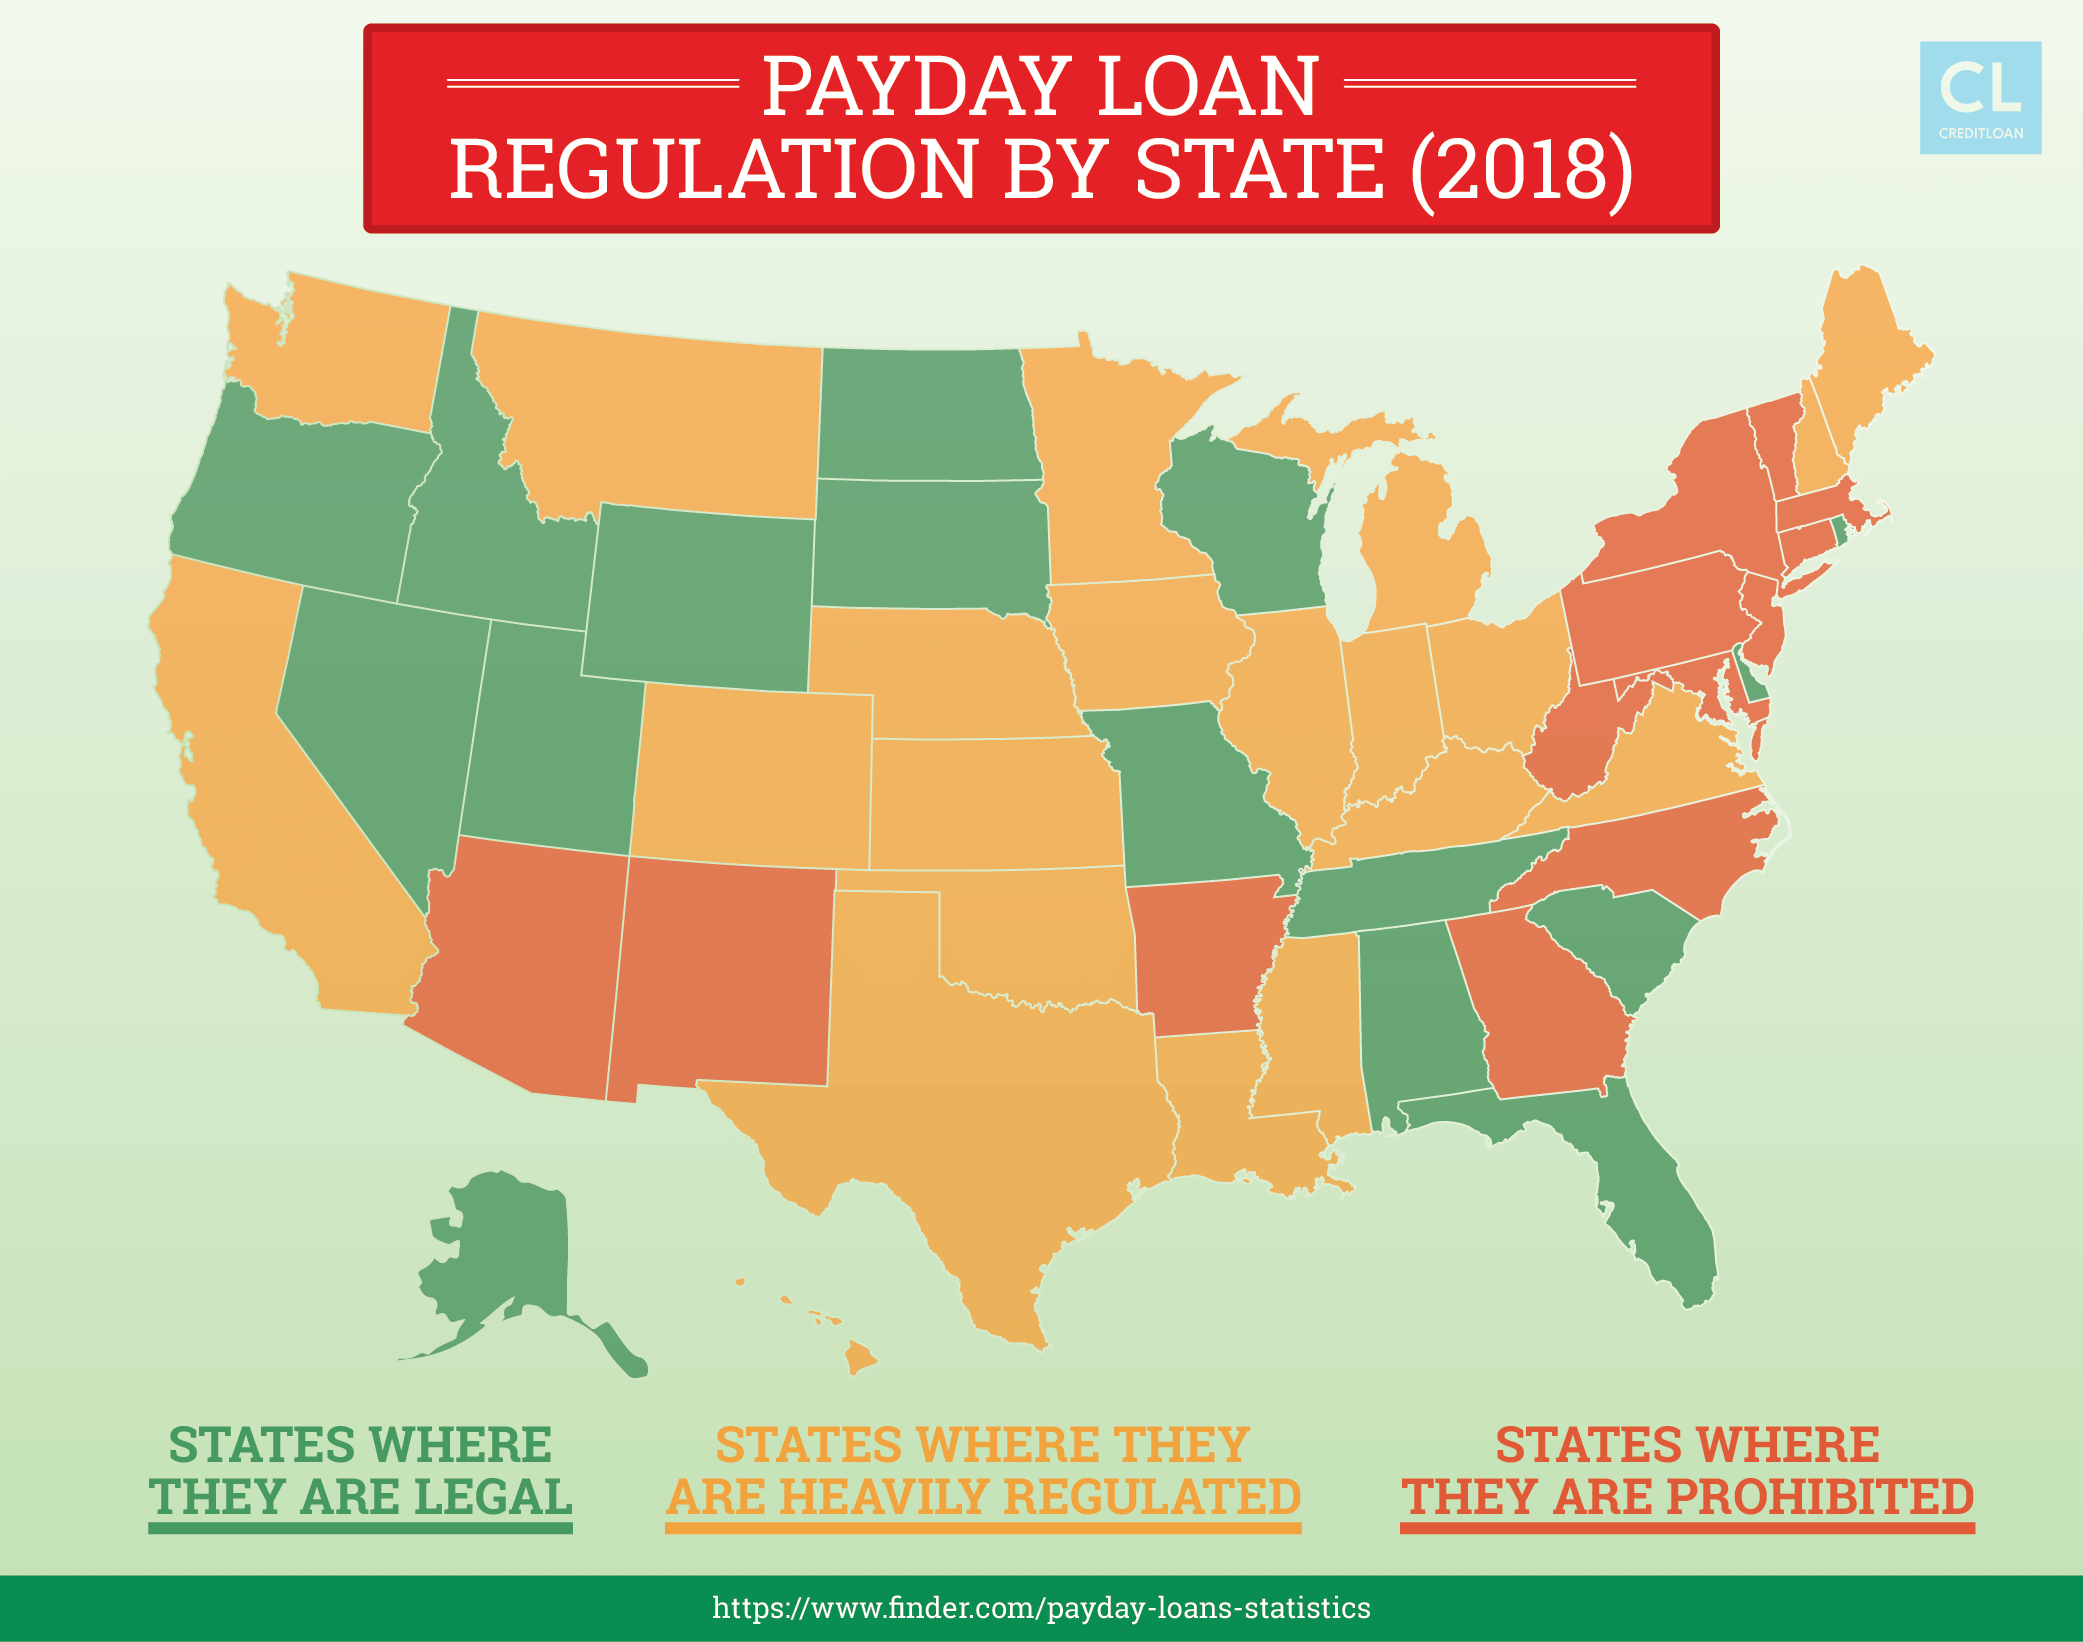 Speedy Cash Review Creditloan Com - 2018 payday loan regulation by state